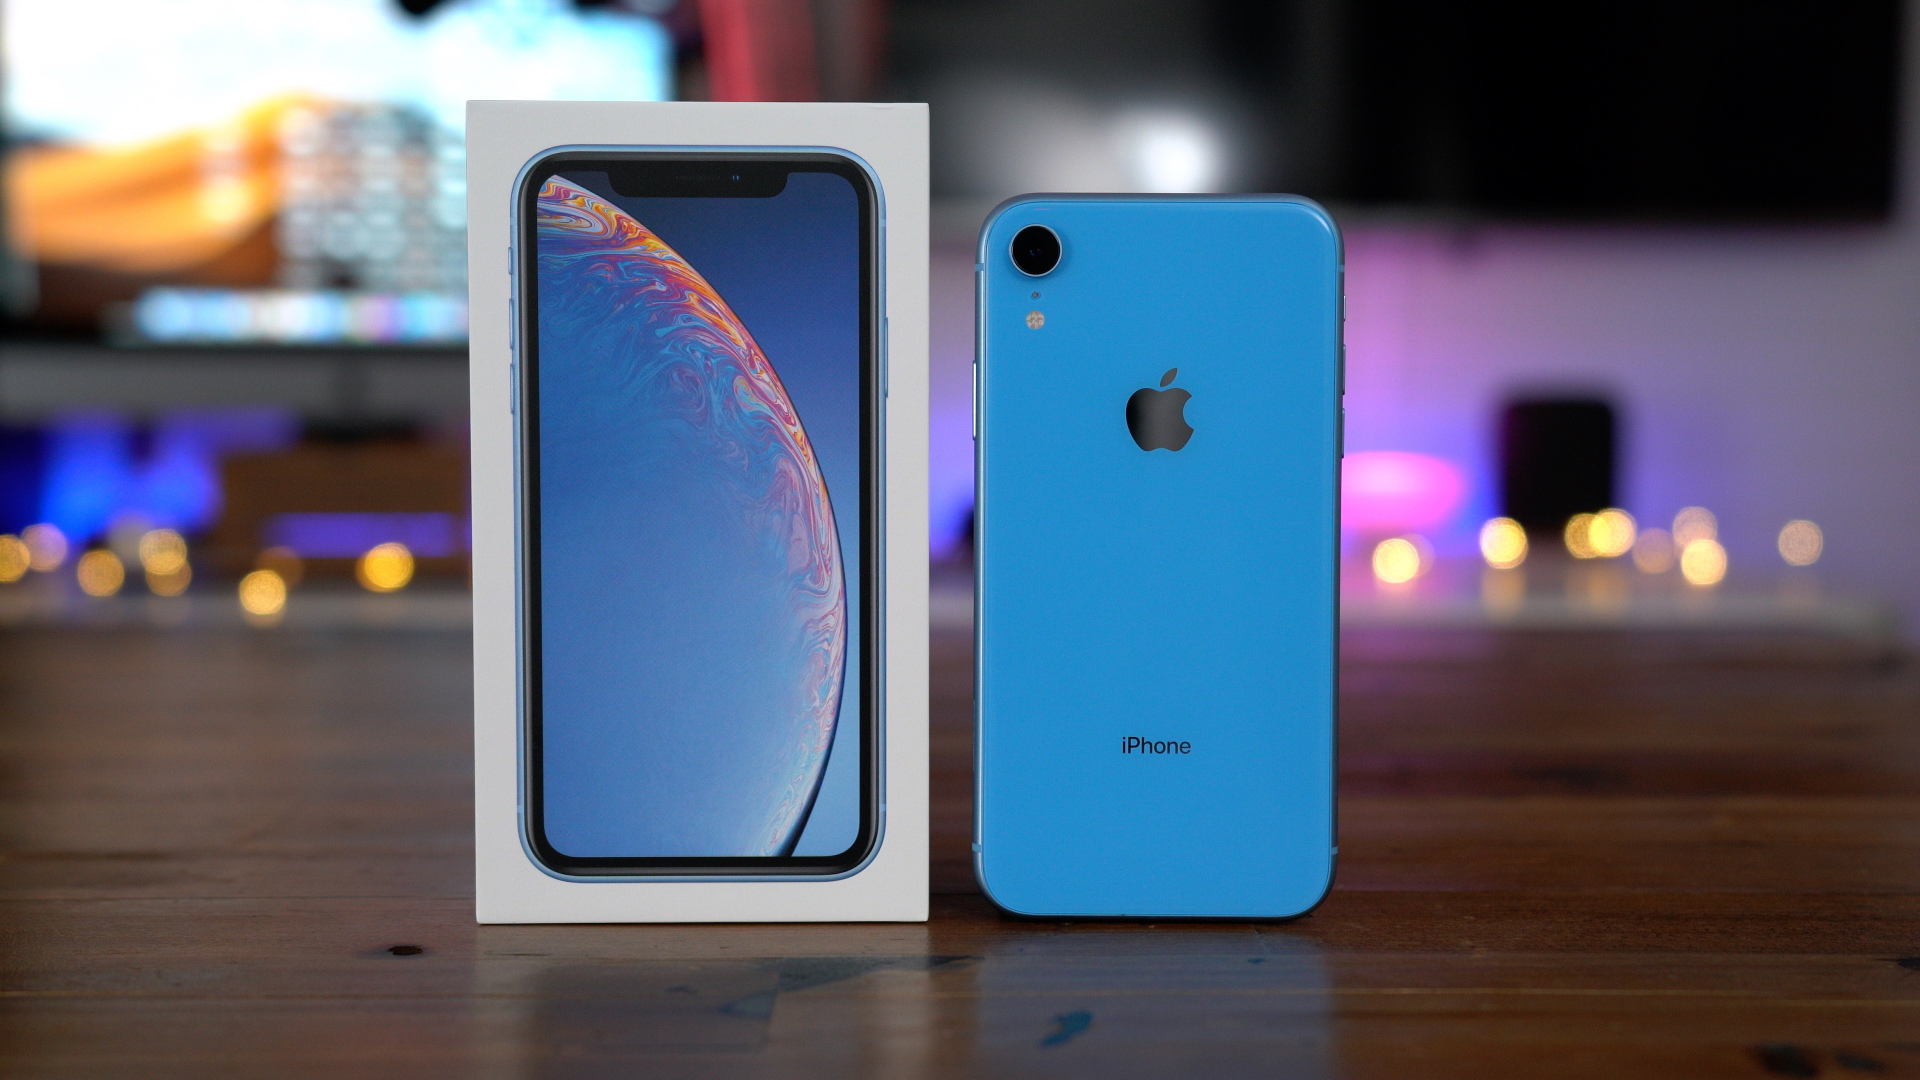 Top iPhone XR features - best bang for the buck? [Video] - 9to5Mac